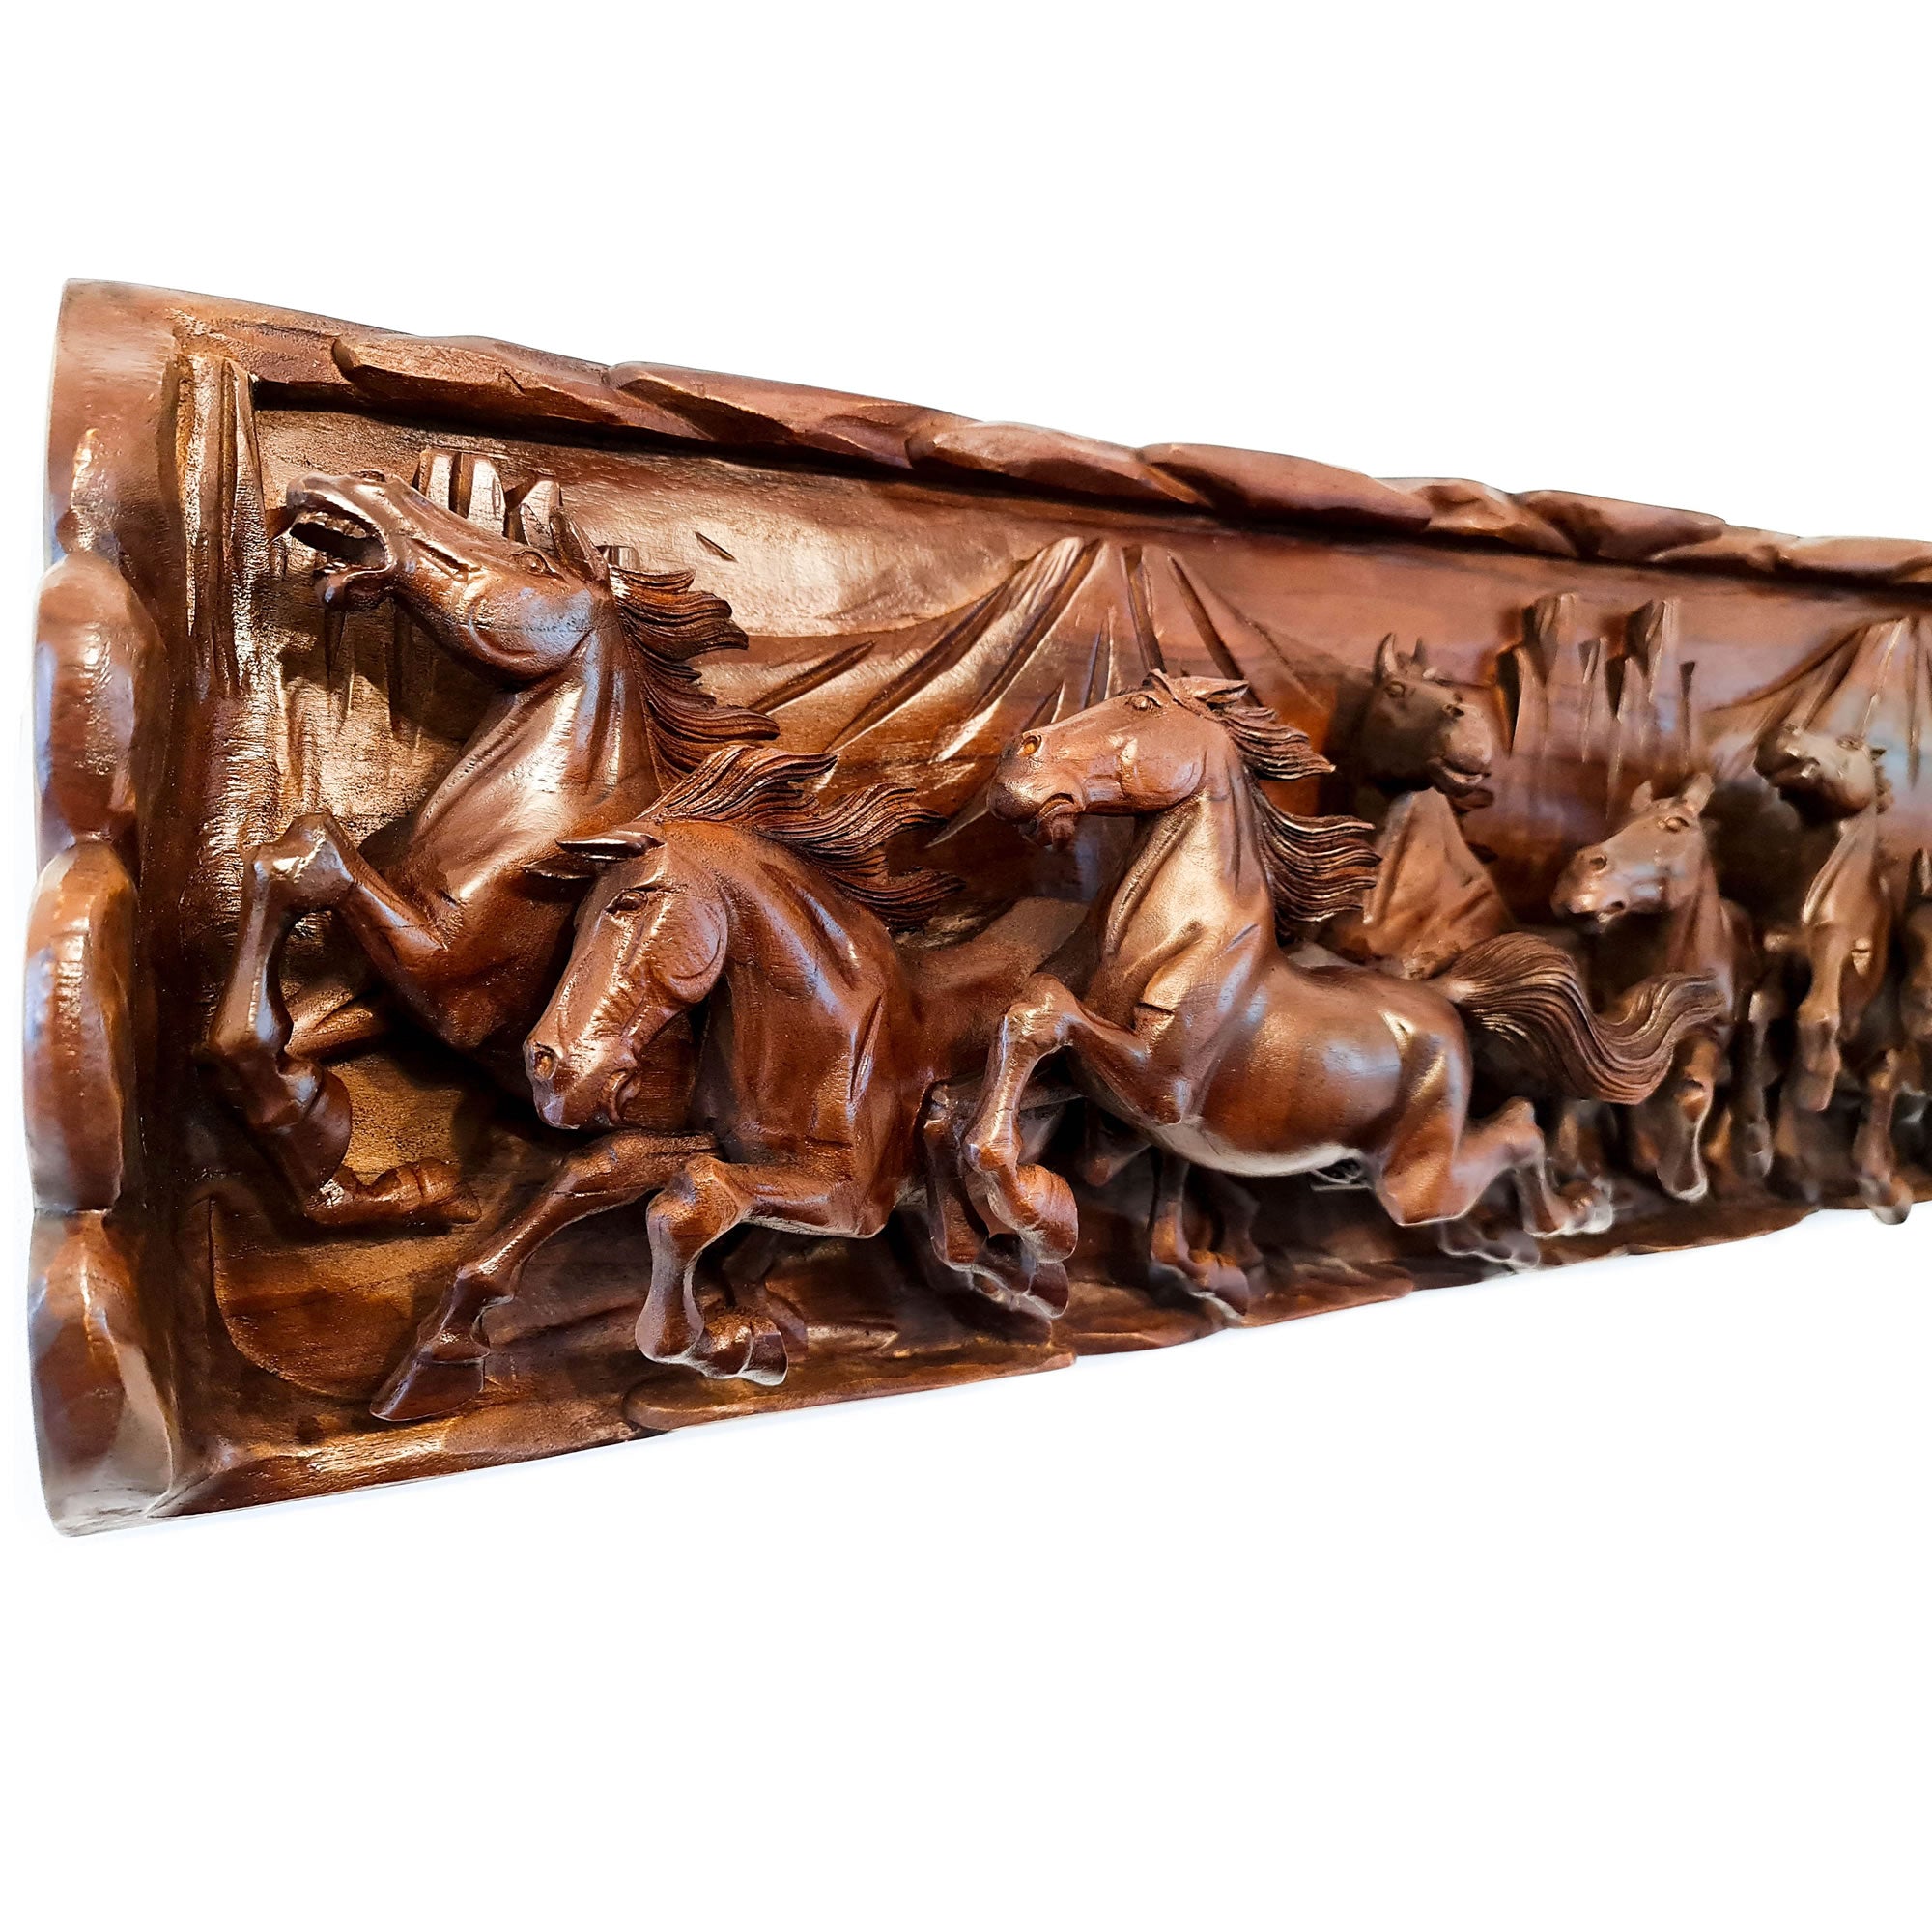 Hand Carved Wild Horses Long Decorative Sculpture Art - Horse Riding Gift